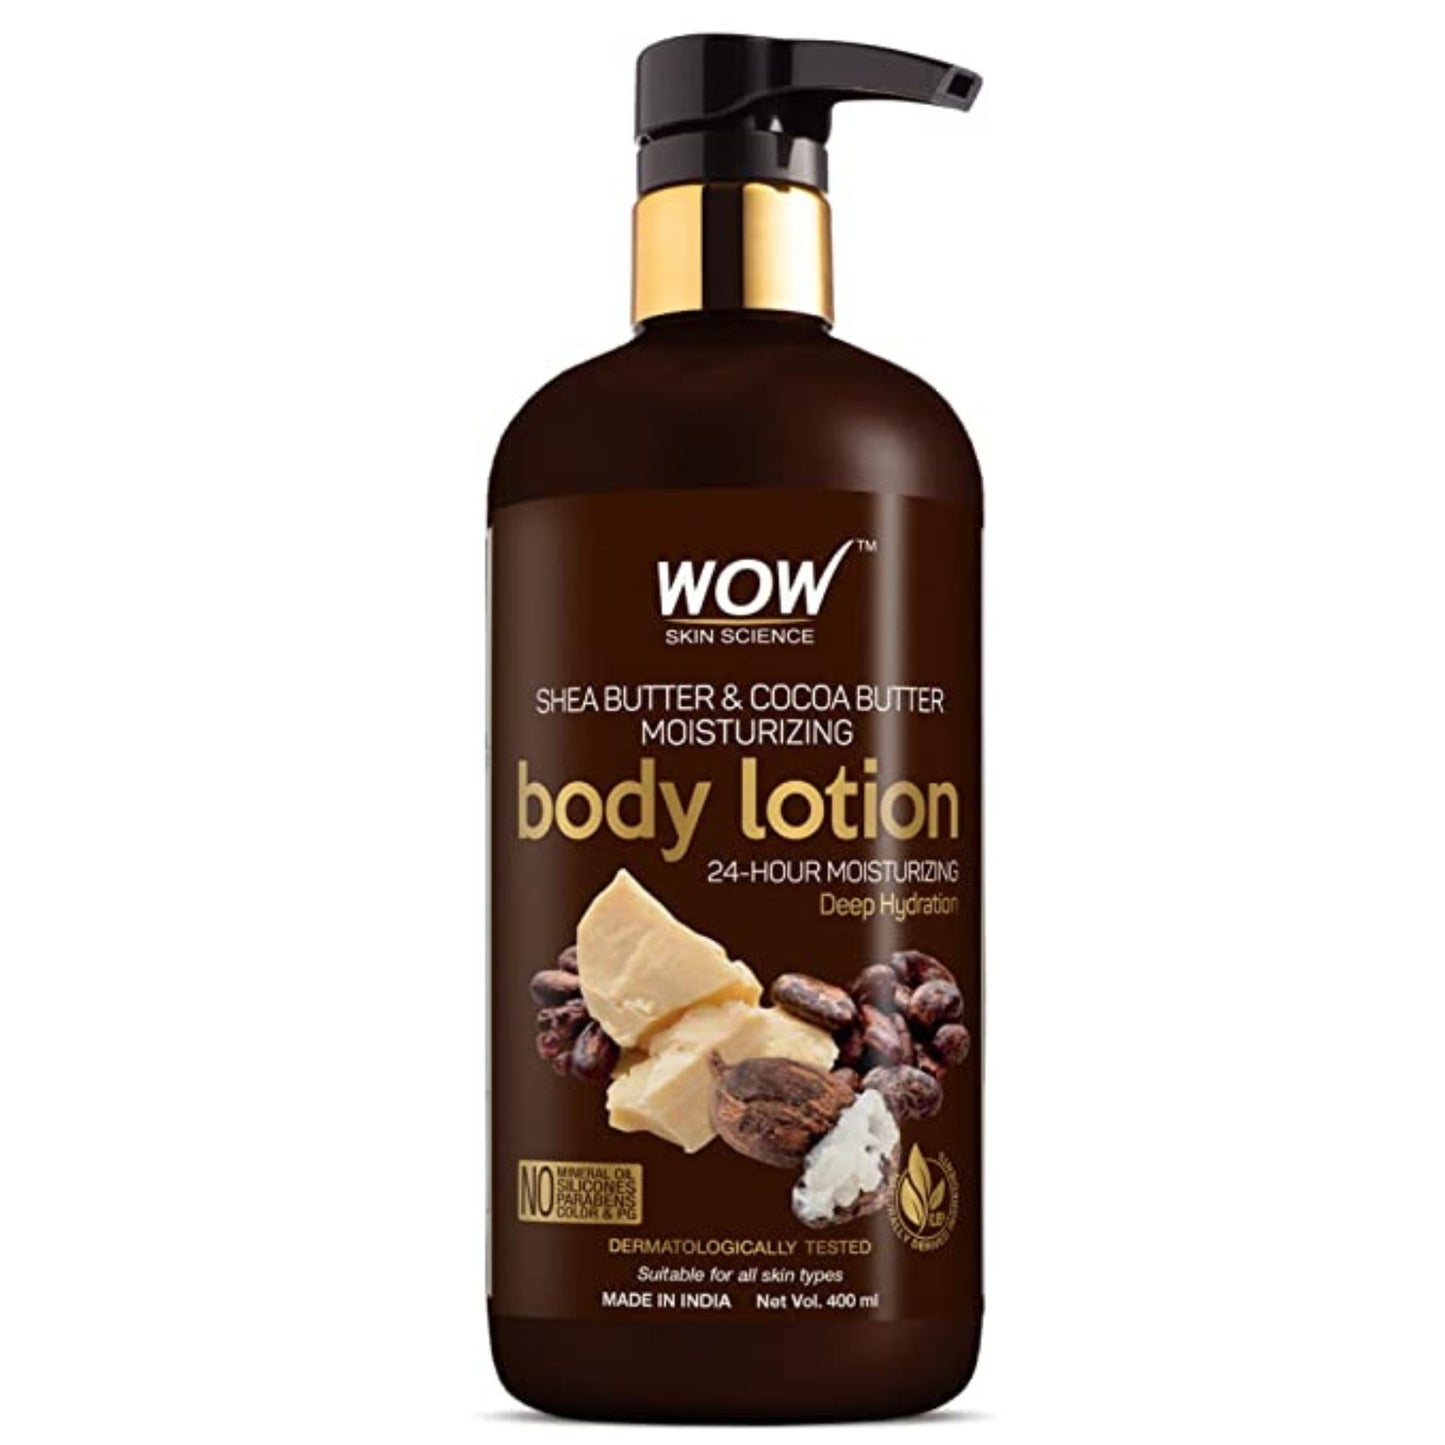 WOW Shea Butter and Cocoa Butter Moisturizing Body Lotion, Deep Hydration